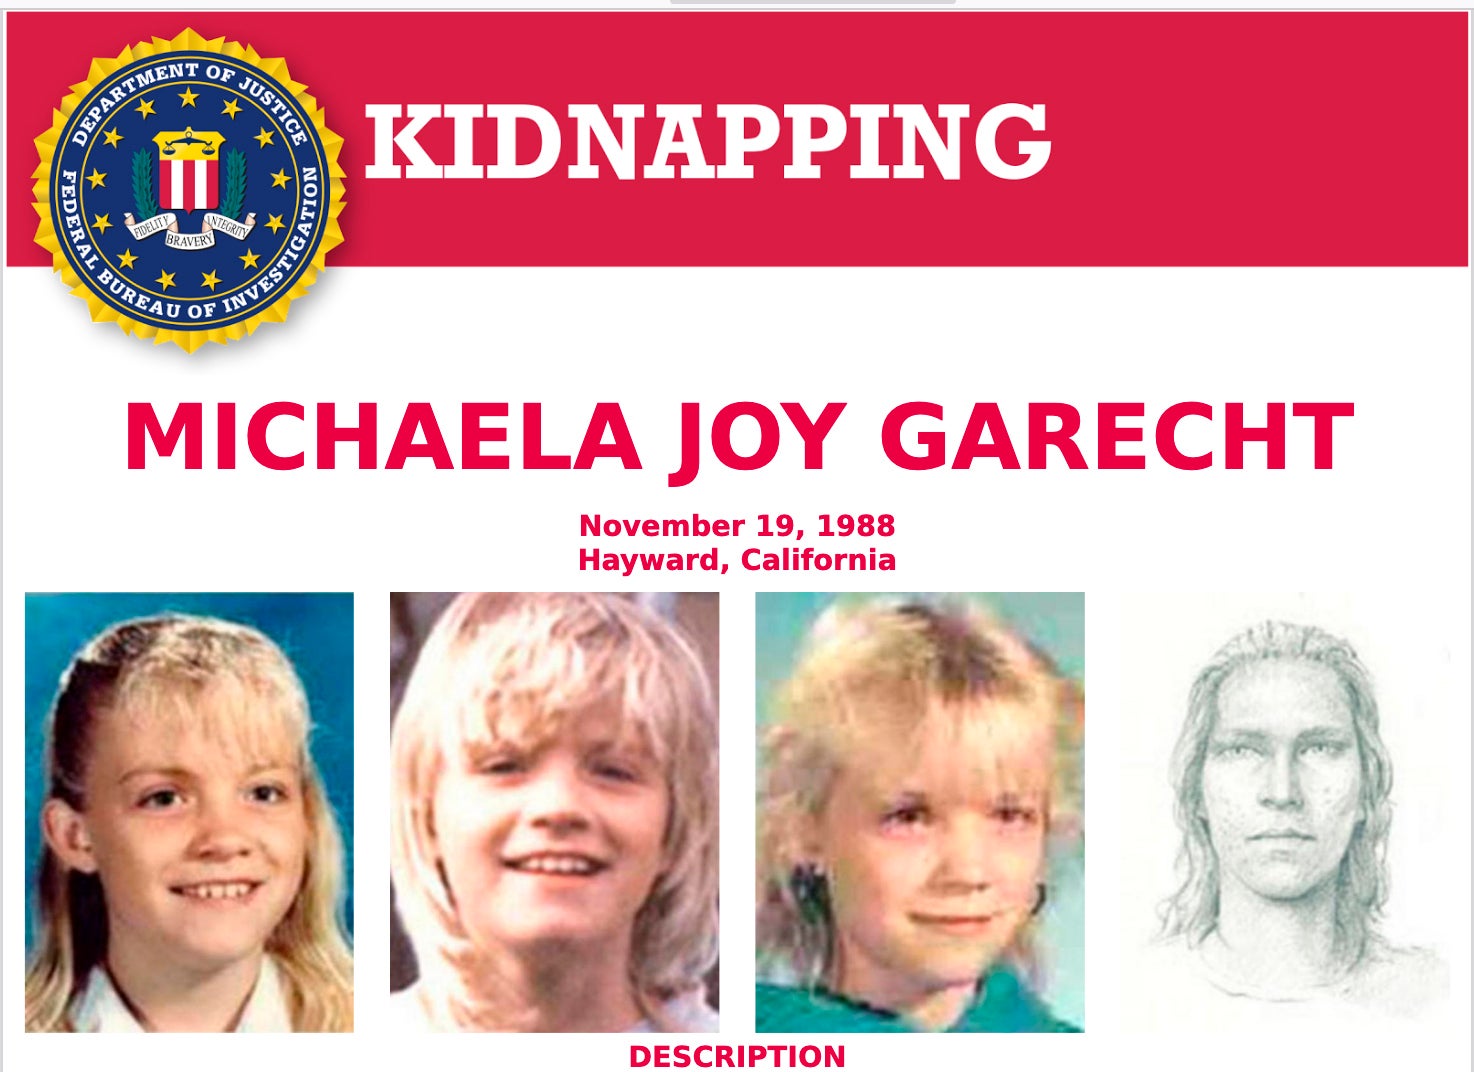 The 1988 poster provided by the FBI shows a wanted poster of photos of kidnapped Michaela Joy Garecht